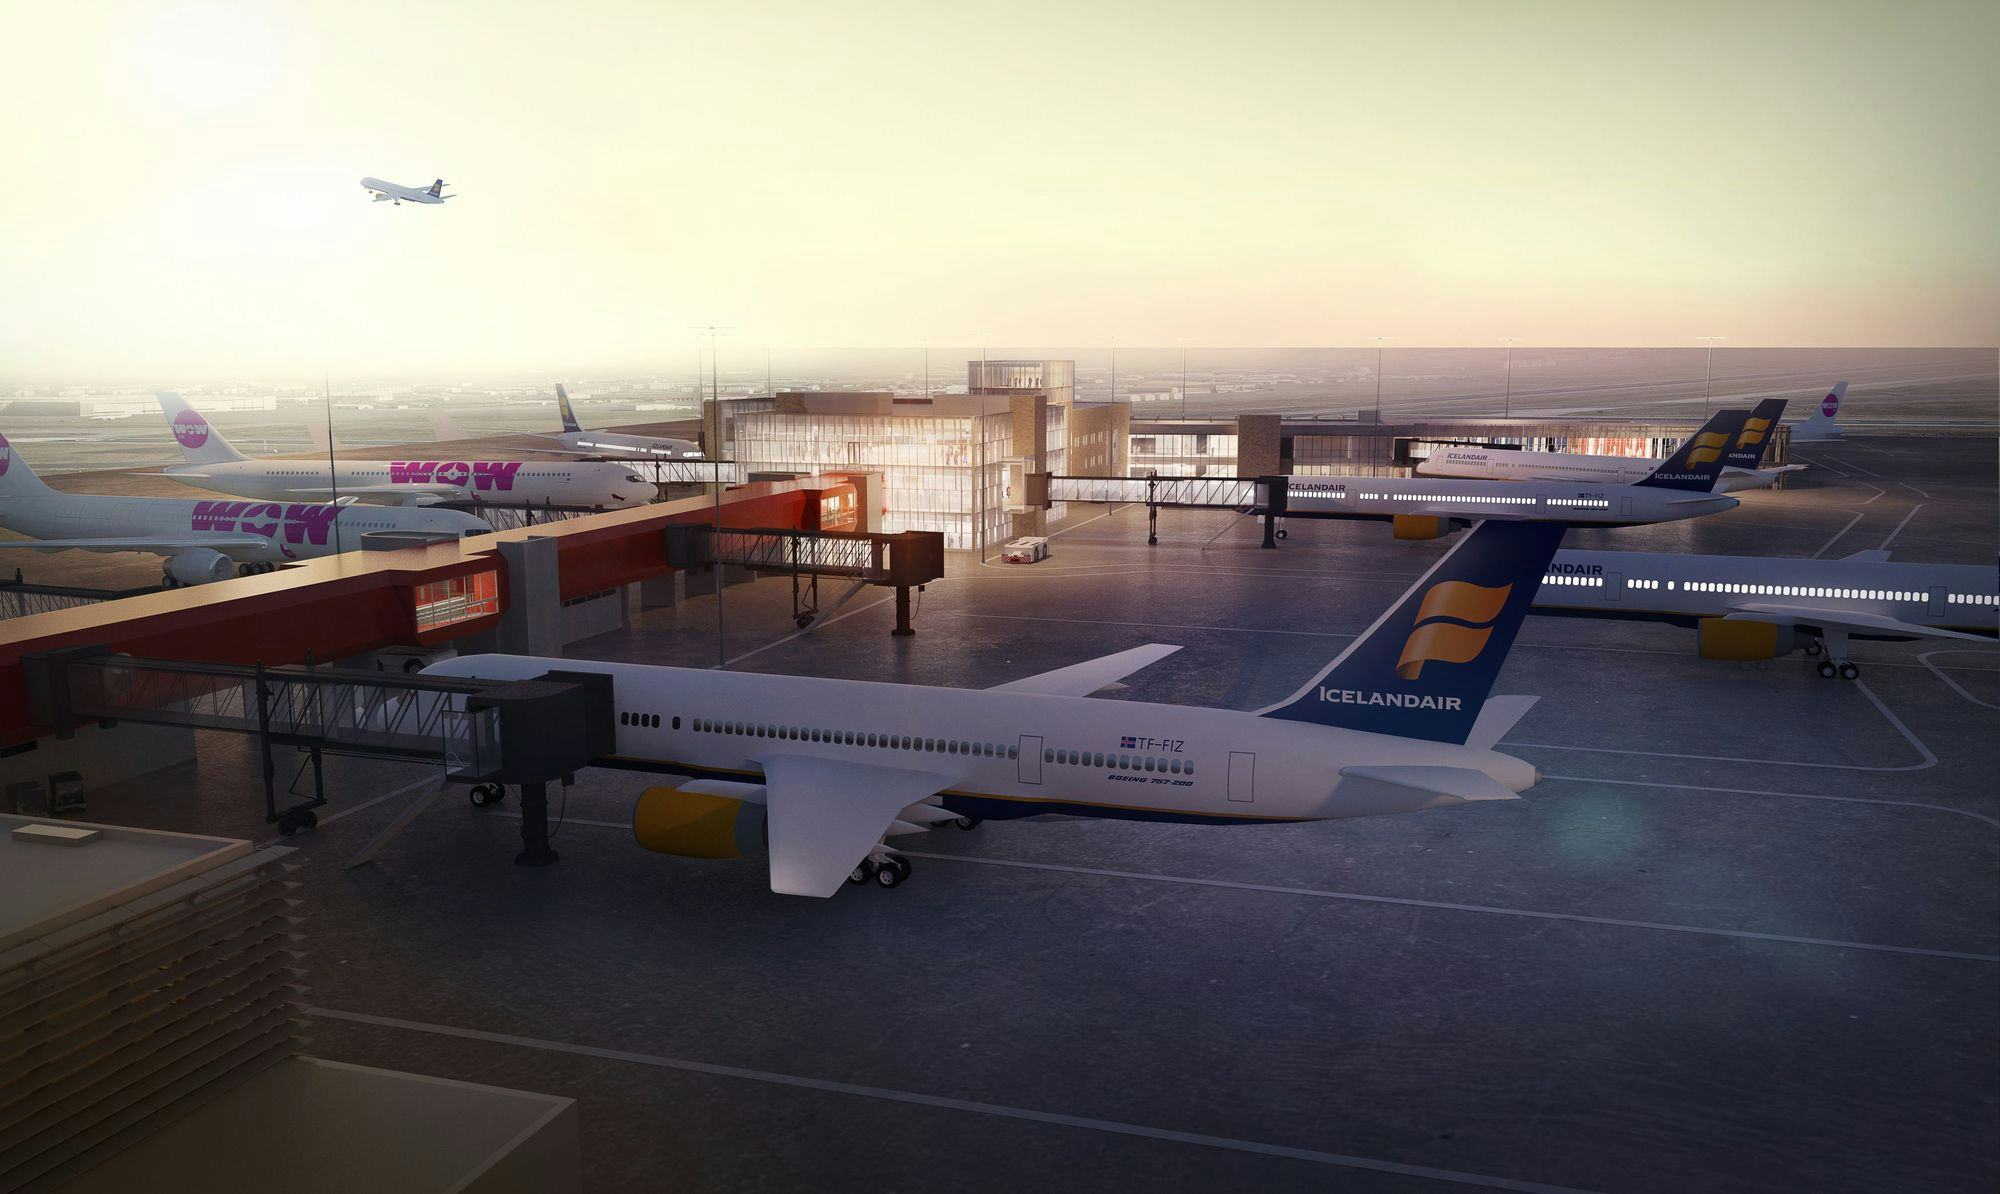 Rendering of an airport, passenger planes on a long runway, one plane in the air, sun setting